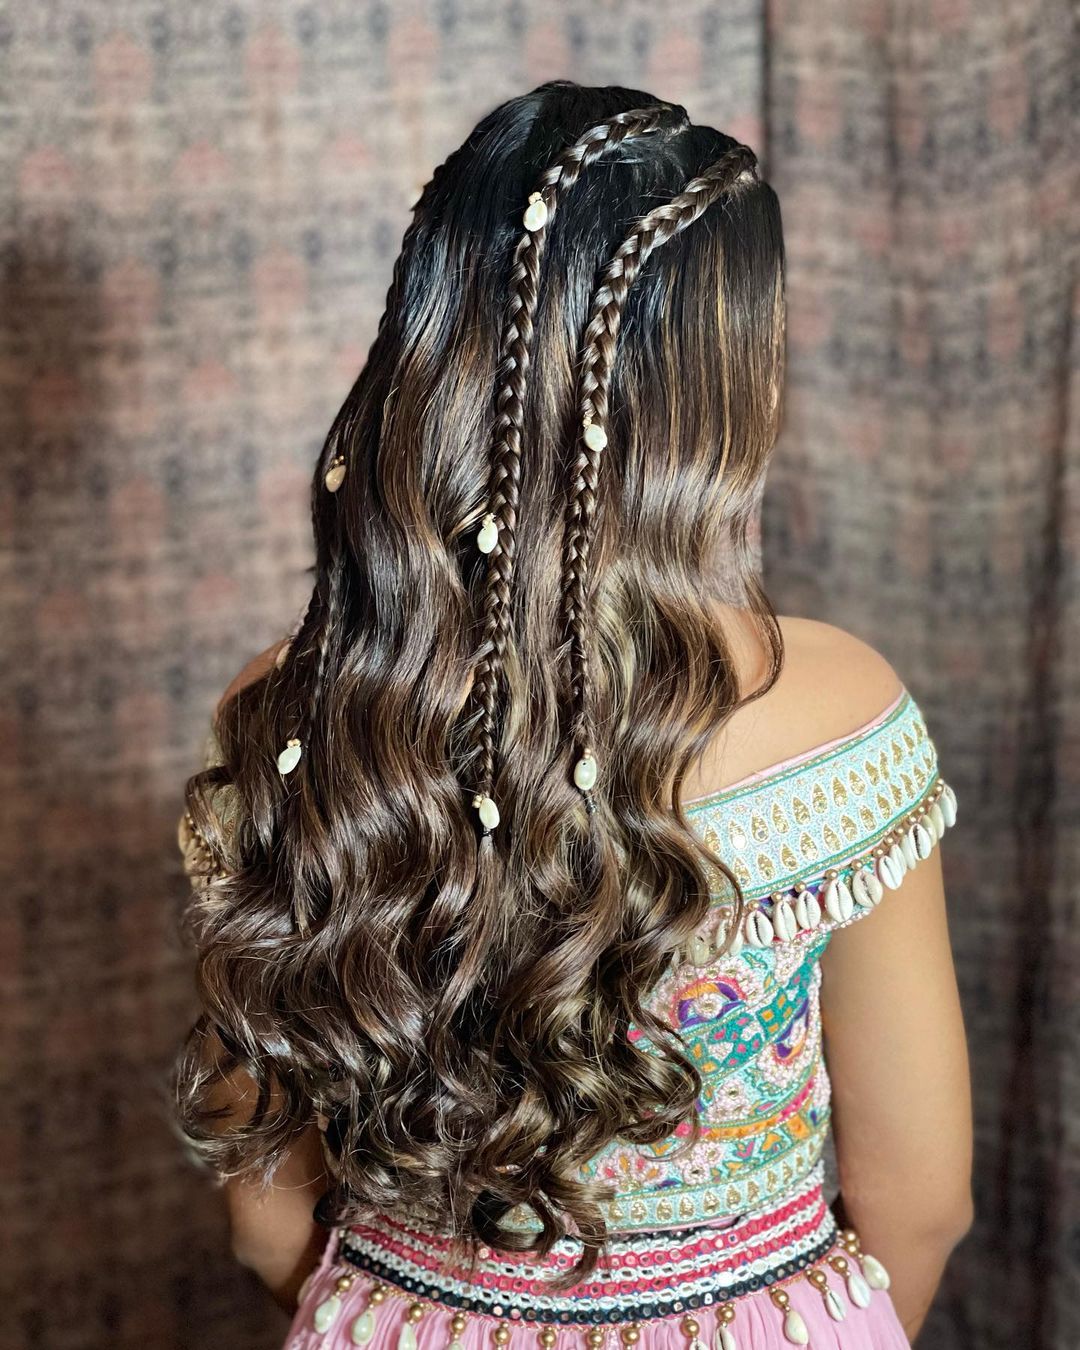 quirky braided hairstyle for crop top lehenga